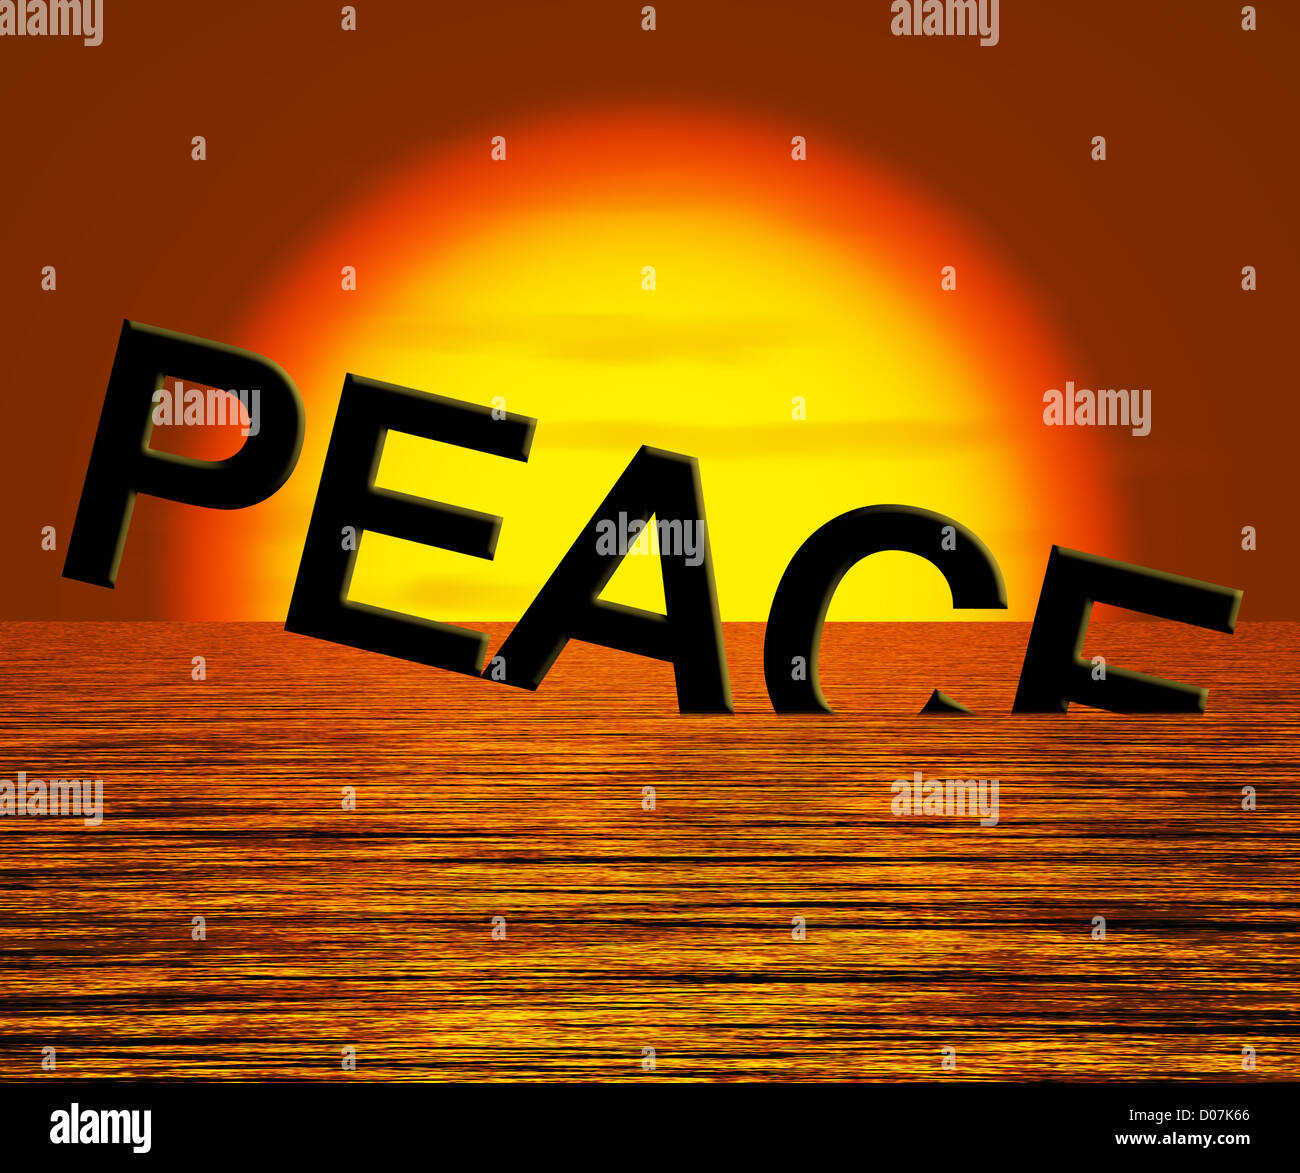 Peace Word Sinking Showing War And Conflicts Stock Photo